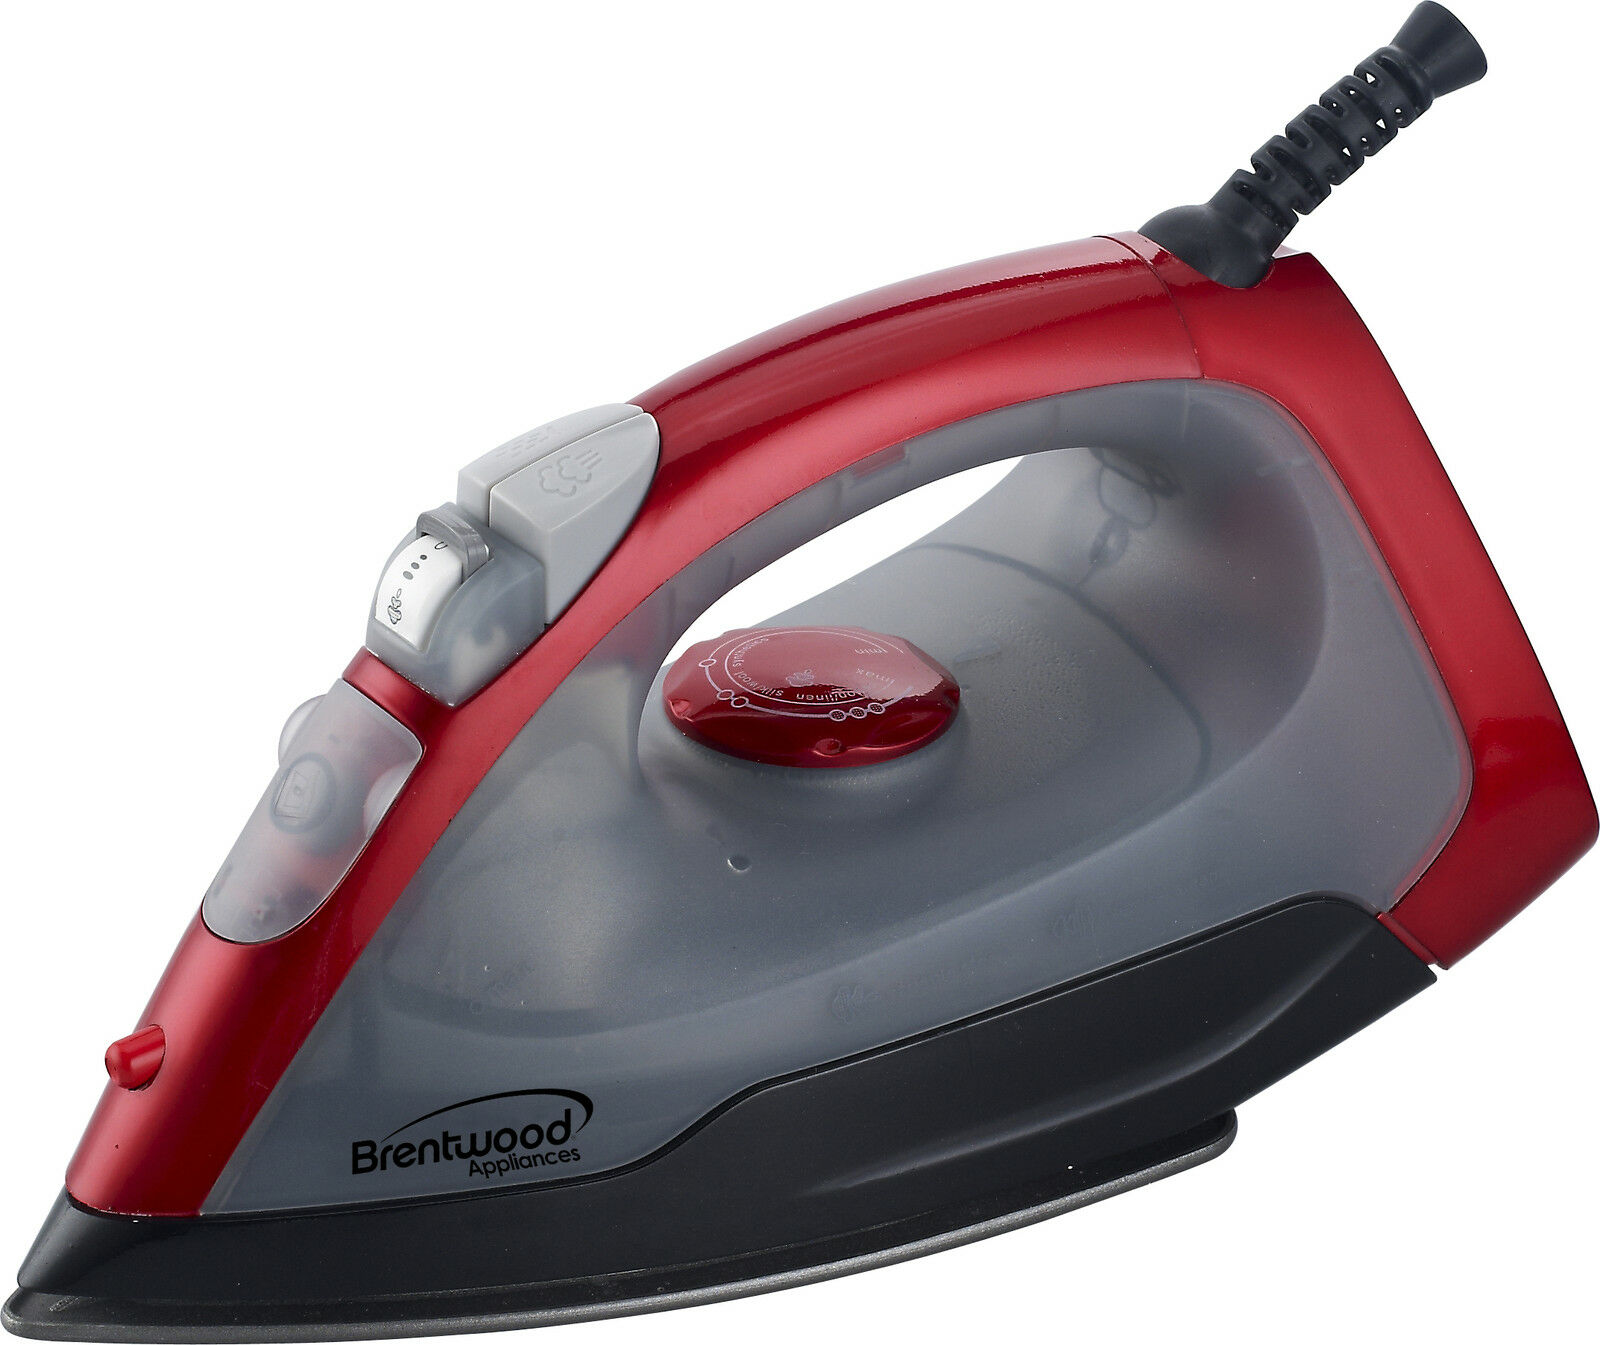 Brentwood Appliances Steam Dry Spray Clothes Electric Iron Red